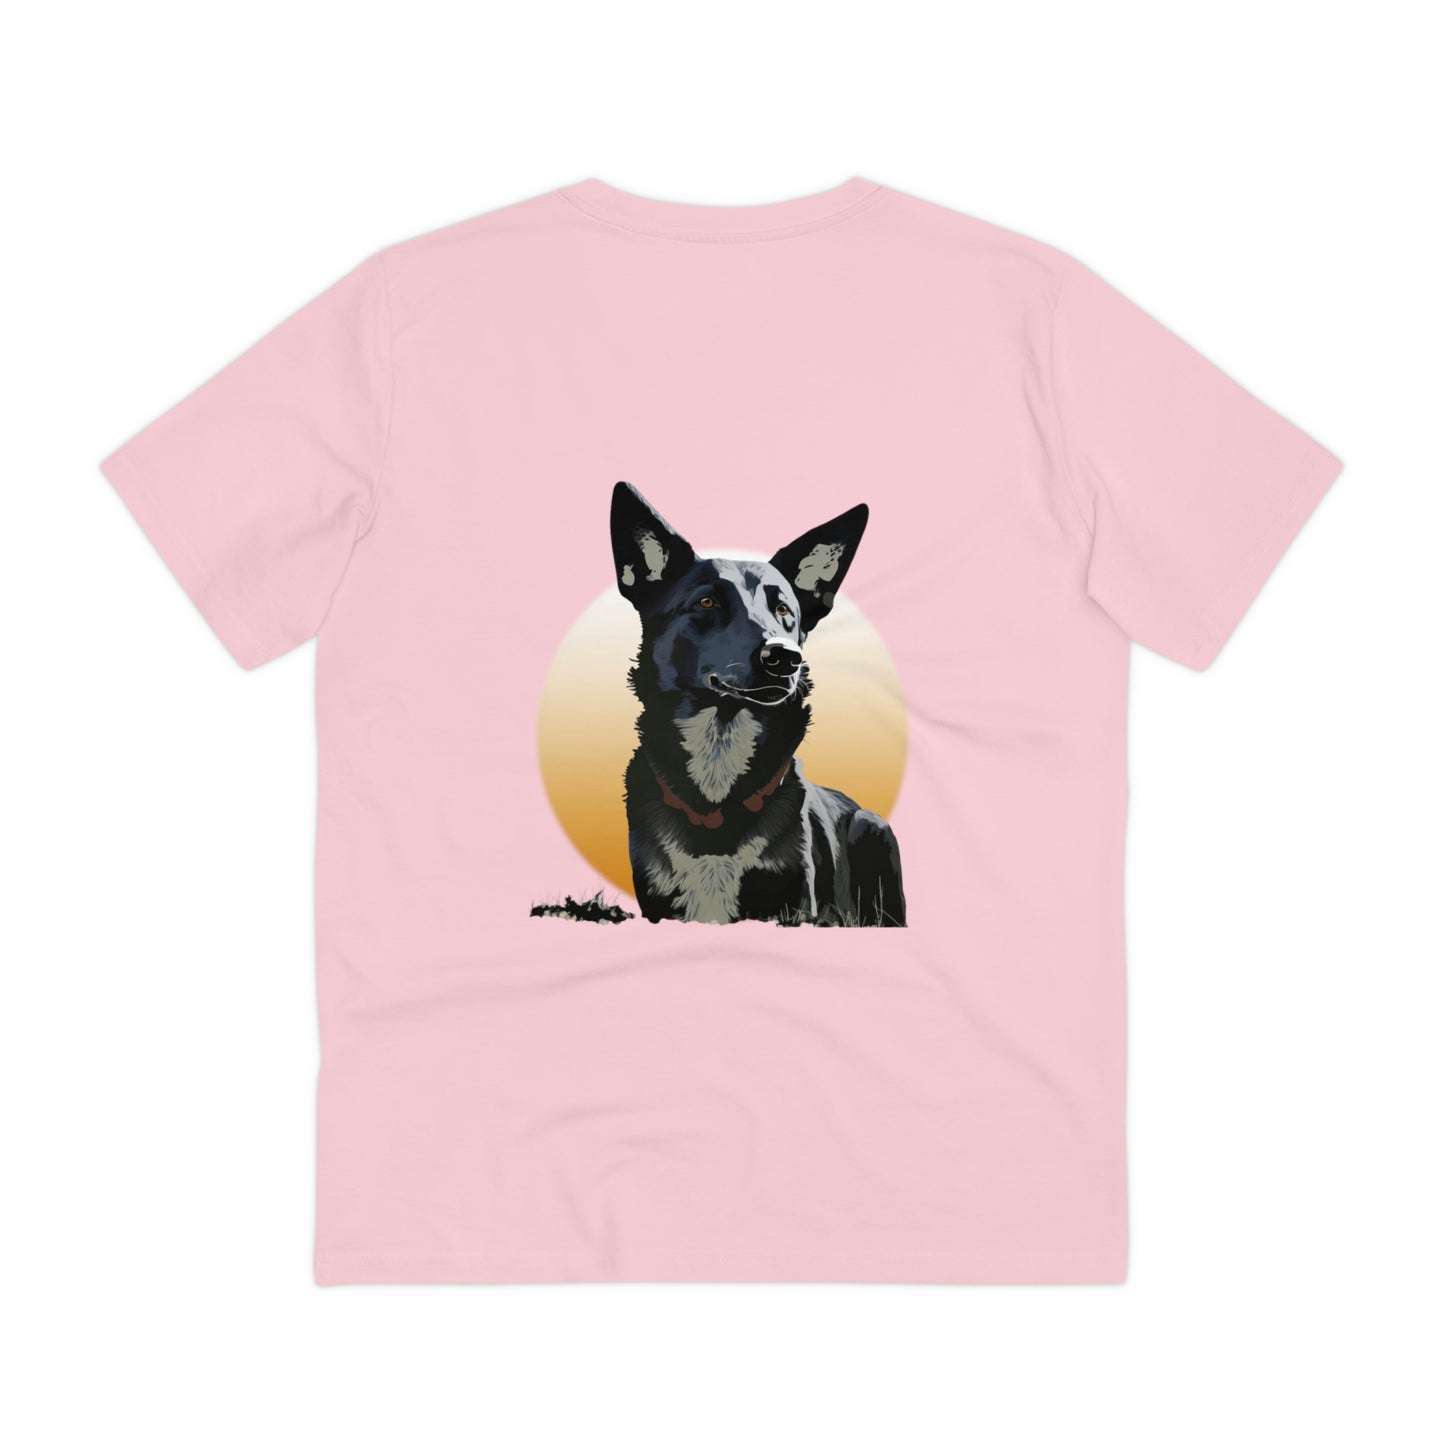 Stay Comfy and Stylish with Our Organic Creator T-shirt - Unisex Dog Design and Premium Quality Fabric Guaranteed!